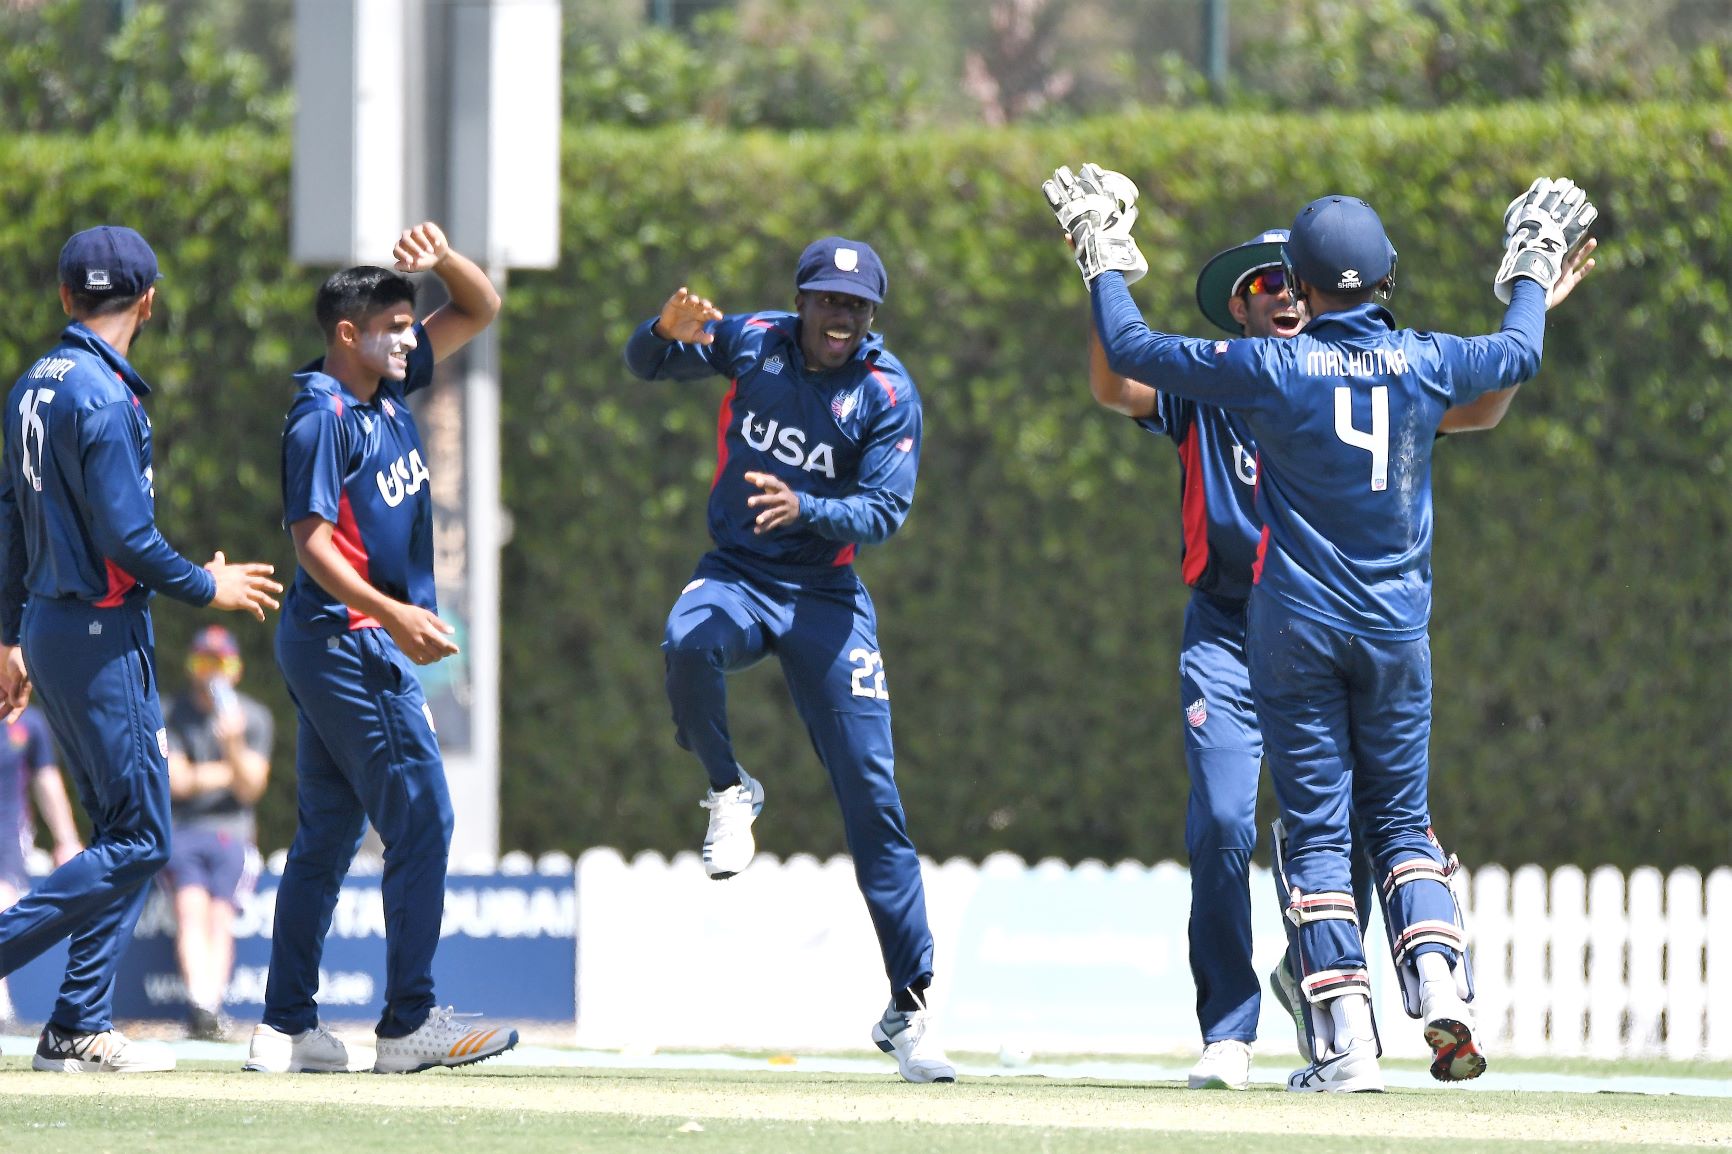 USA Cricket Chooses Partner to Fund and Develop U.S.-Based Professional T20 Cricket League